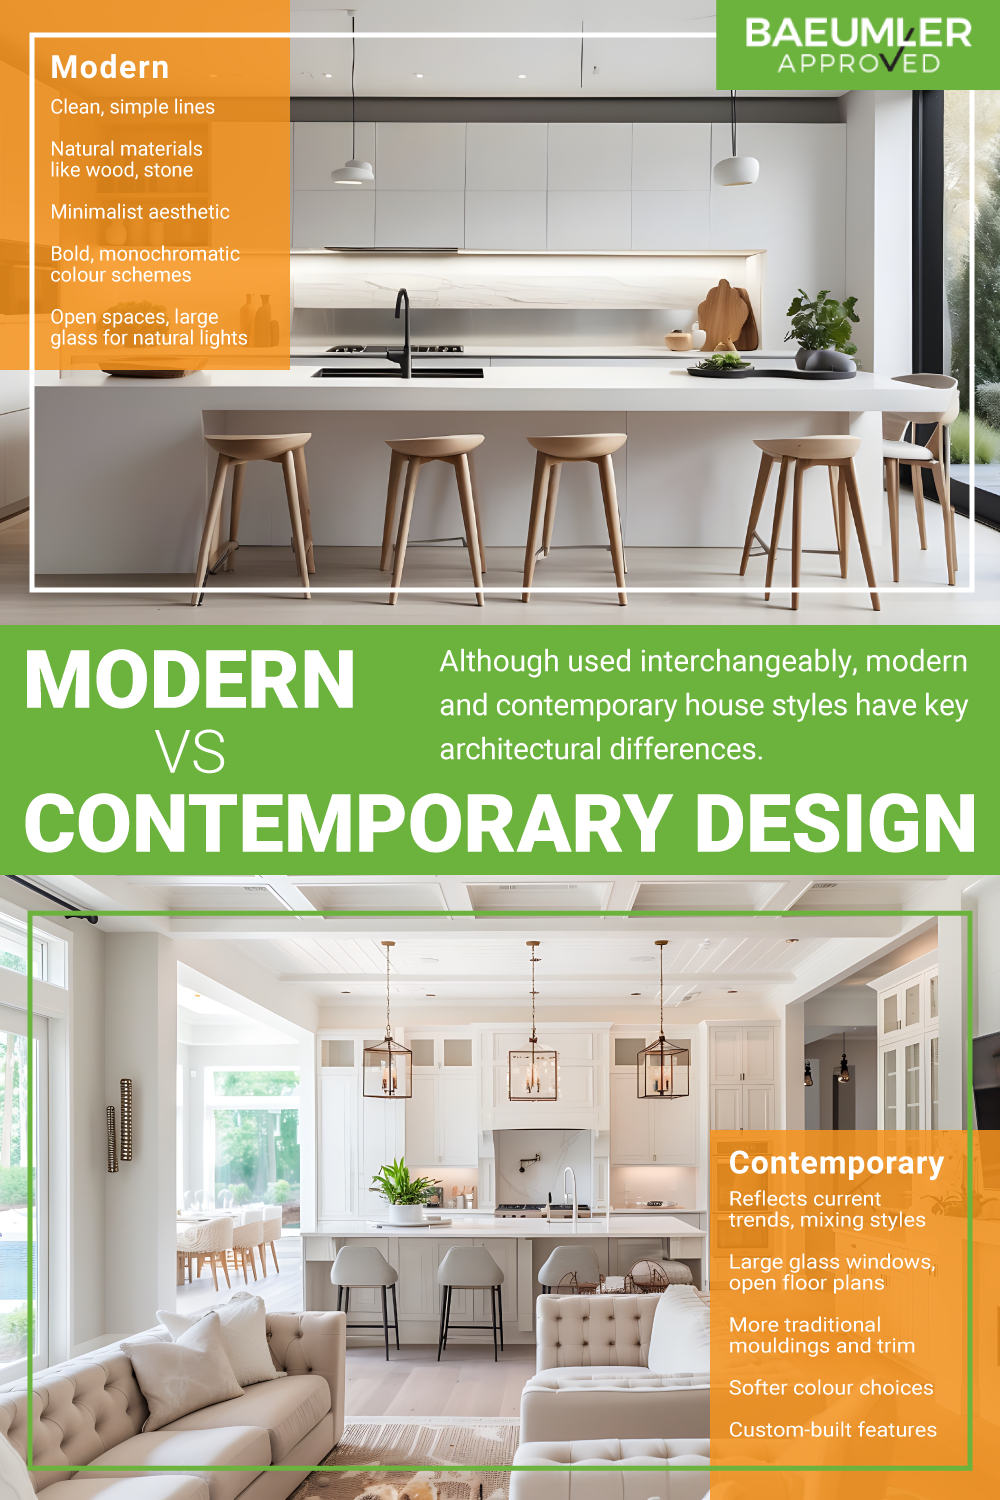 Do You Want a Modern Home or a Contemporary Home? Understanding Today's Design Trends Infographic